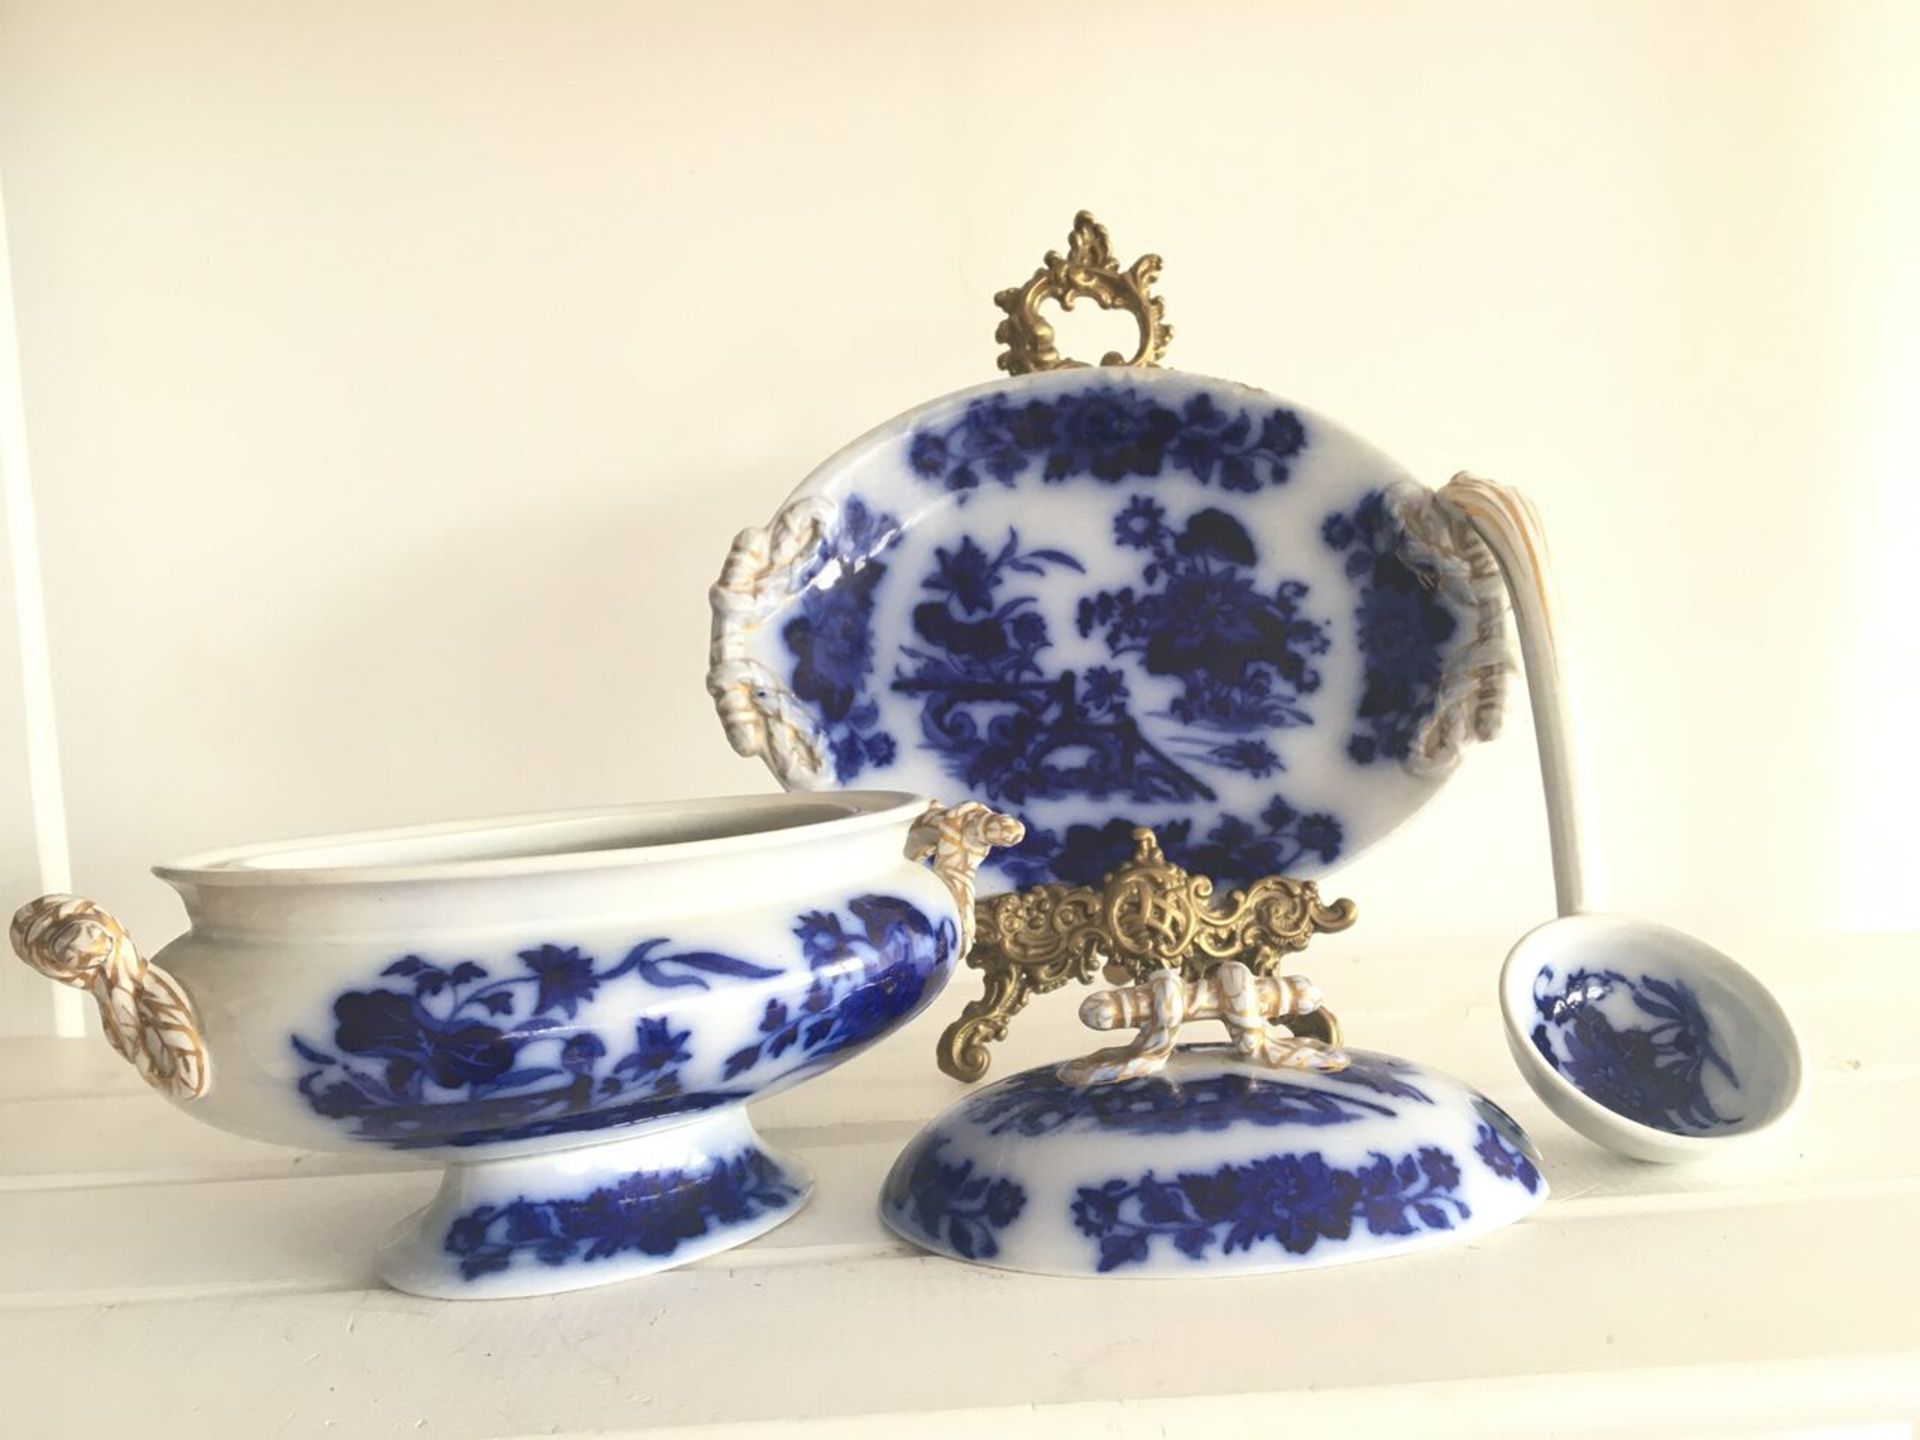 RARE ANTIQUE ASHWORTH FLOW BLUE TUREEN c1870. COMPLETE WITH LID, LADLE & UNDERPLATE. CONDITION -